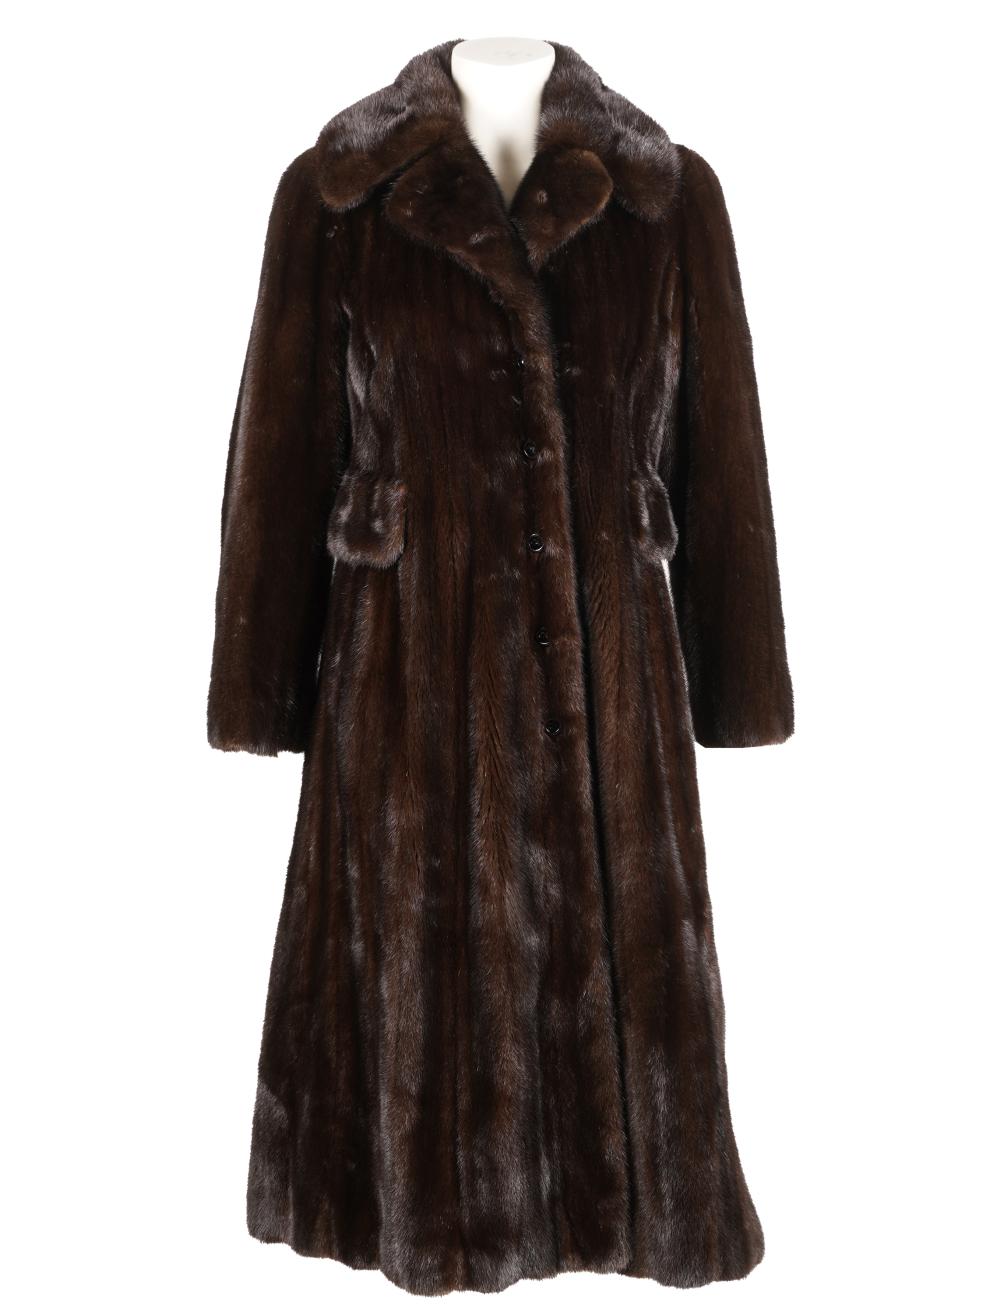 BROWN MINK COATwith Alexandre New 33199a